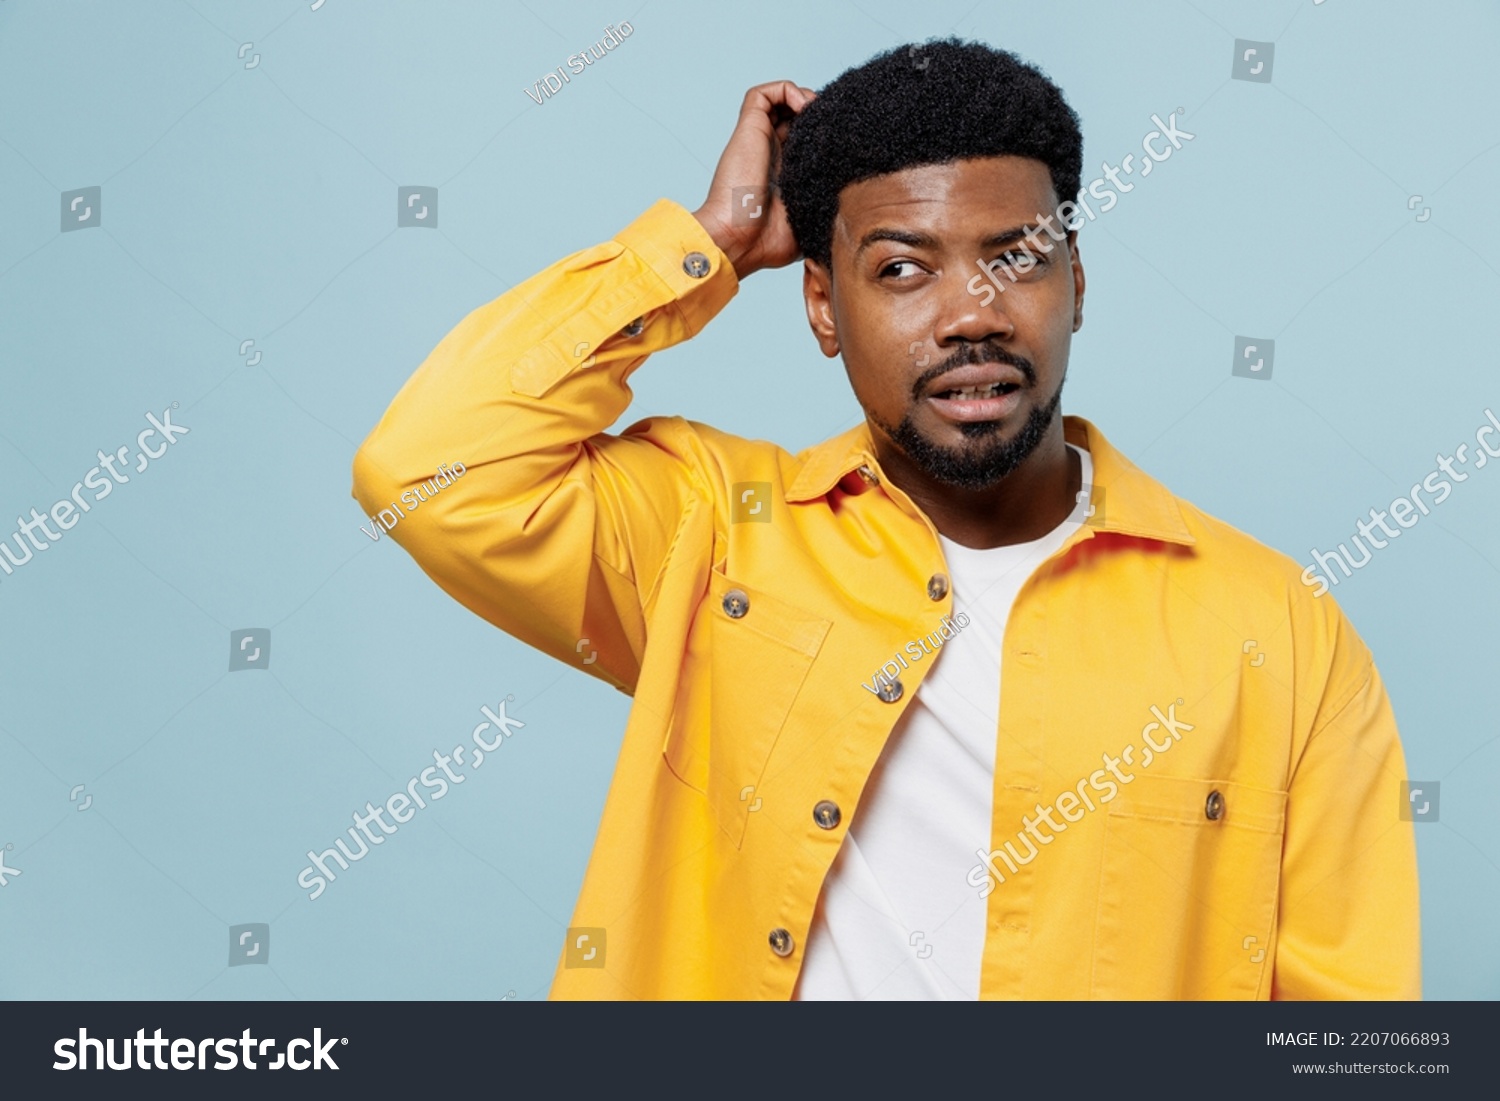 Young puzzled sad man of African American ethnicity wear yellow shirt look aside on workspace scratch hold head isolated on plain pastel light blue background studio portrait. People lifestyle concept #2207066893